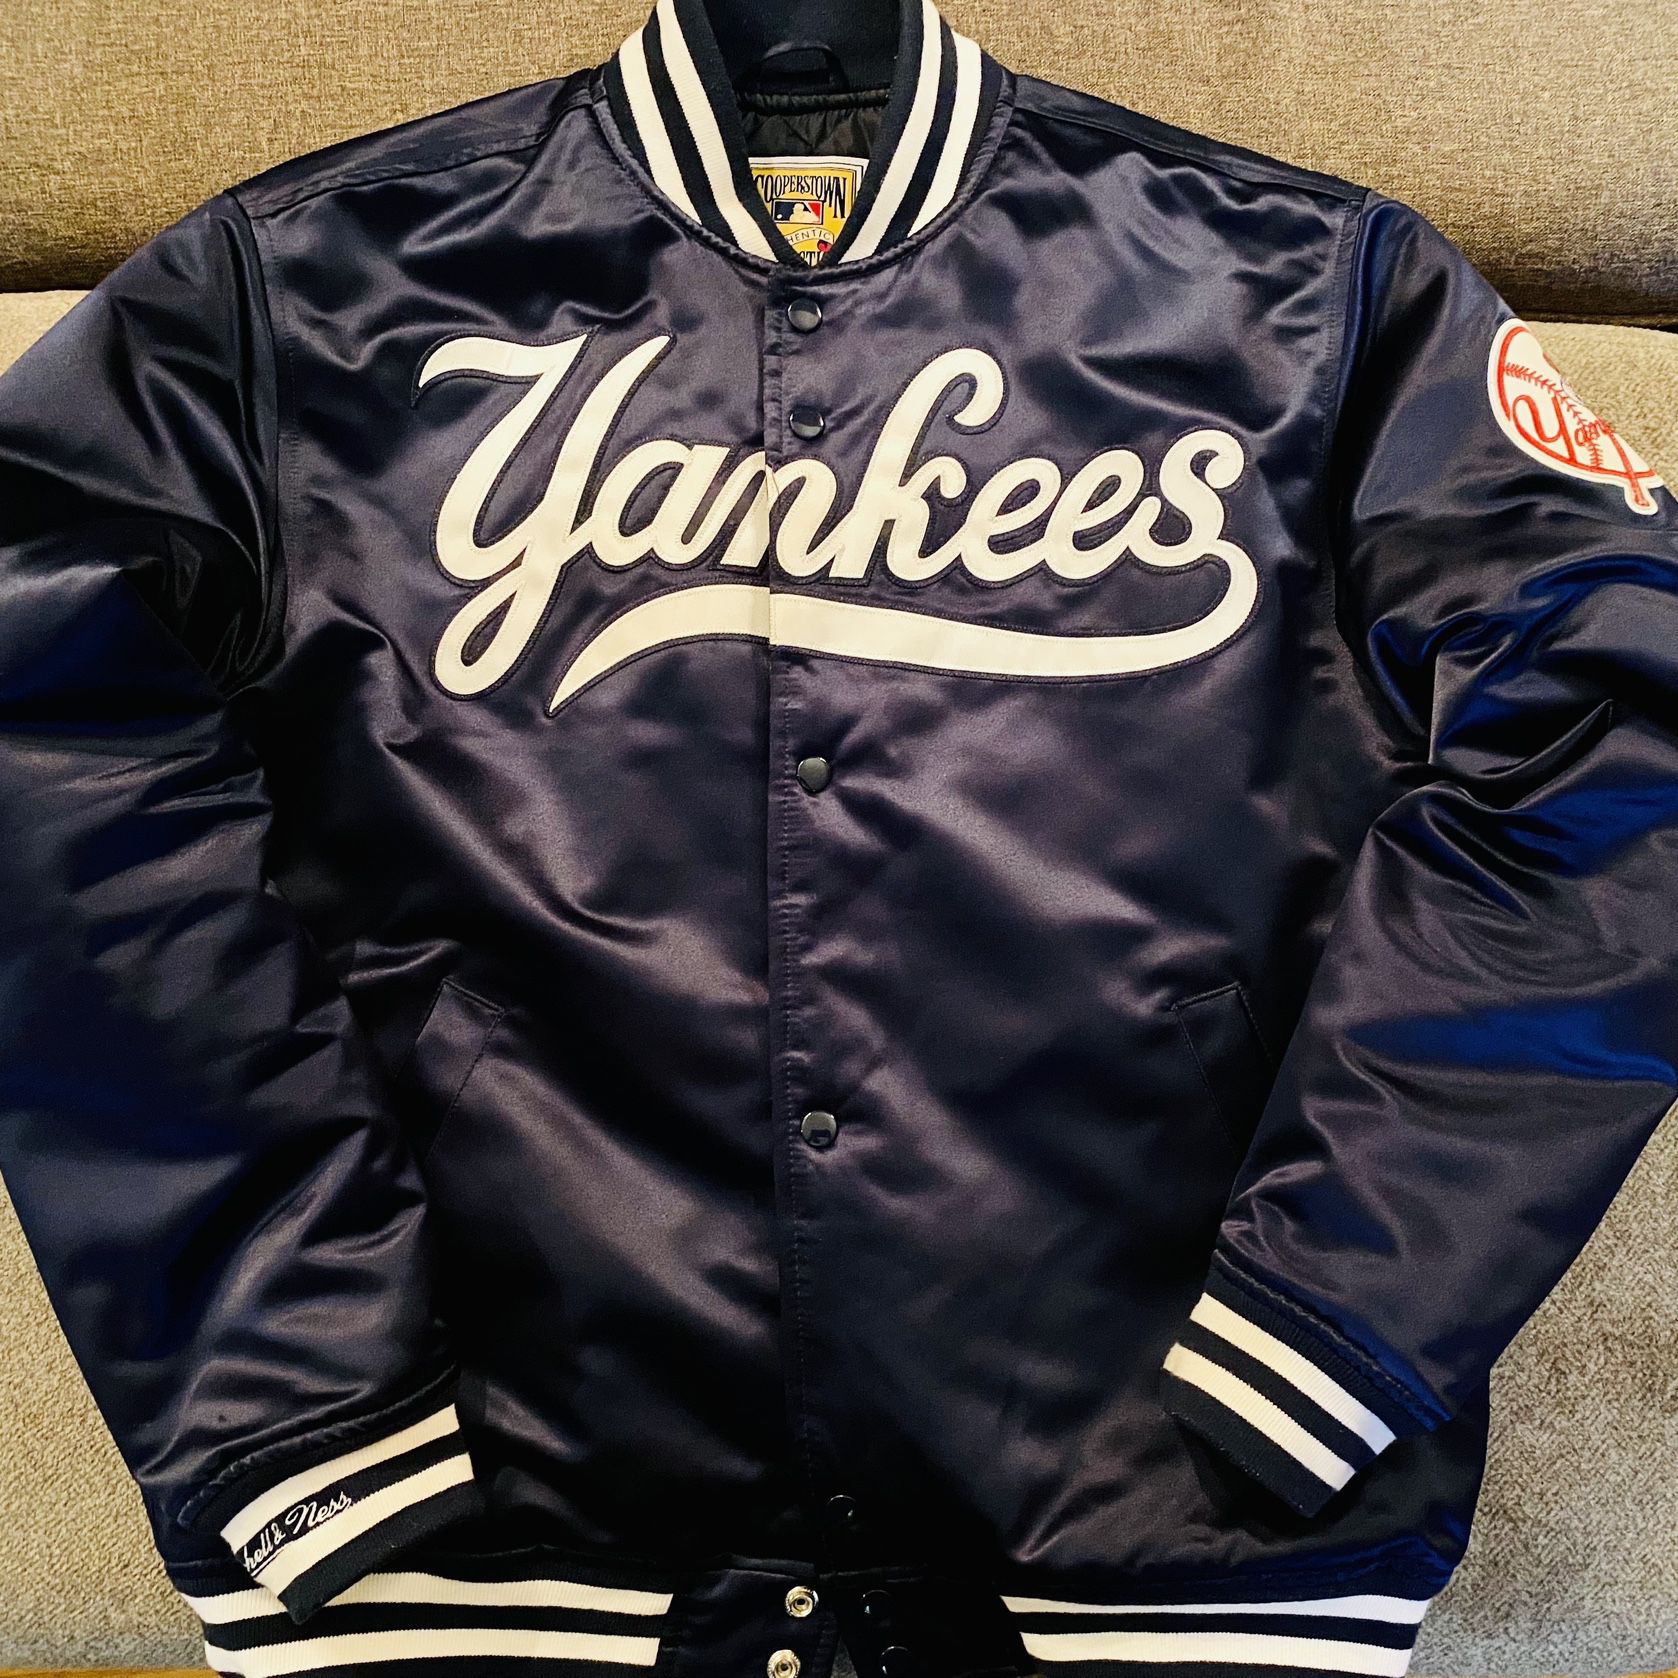 Polo Ralph Lauren Yankees Jacket for Sale in New York, NY - OfferUp